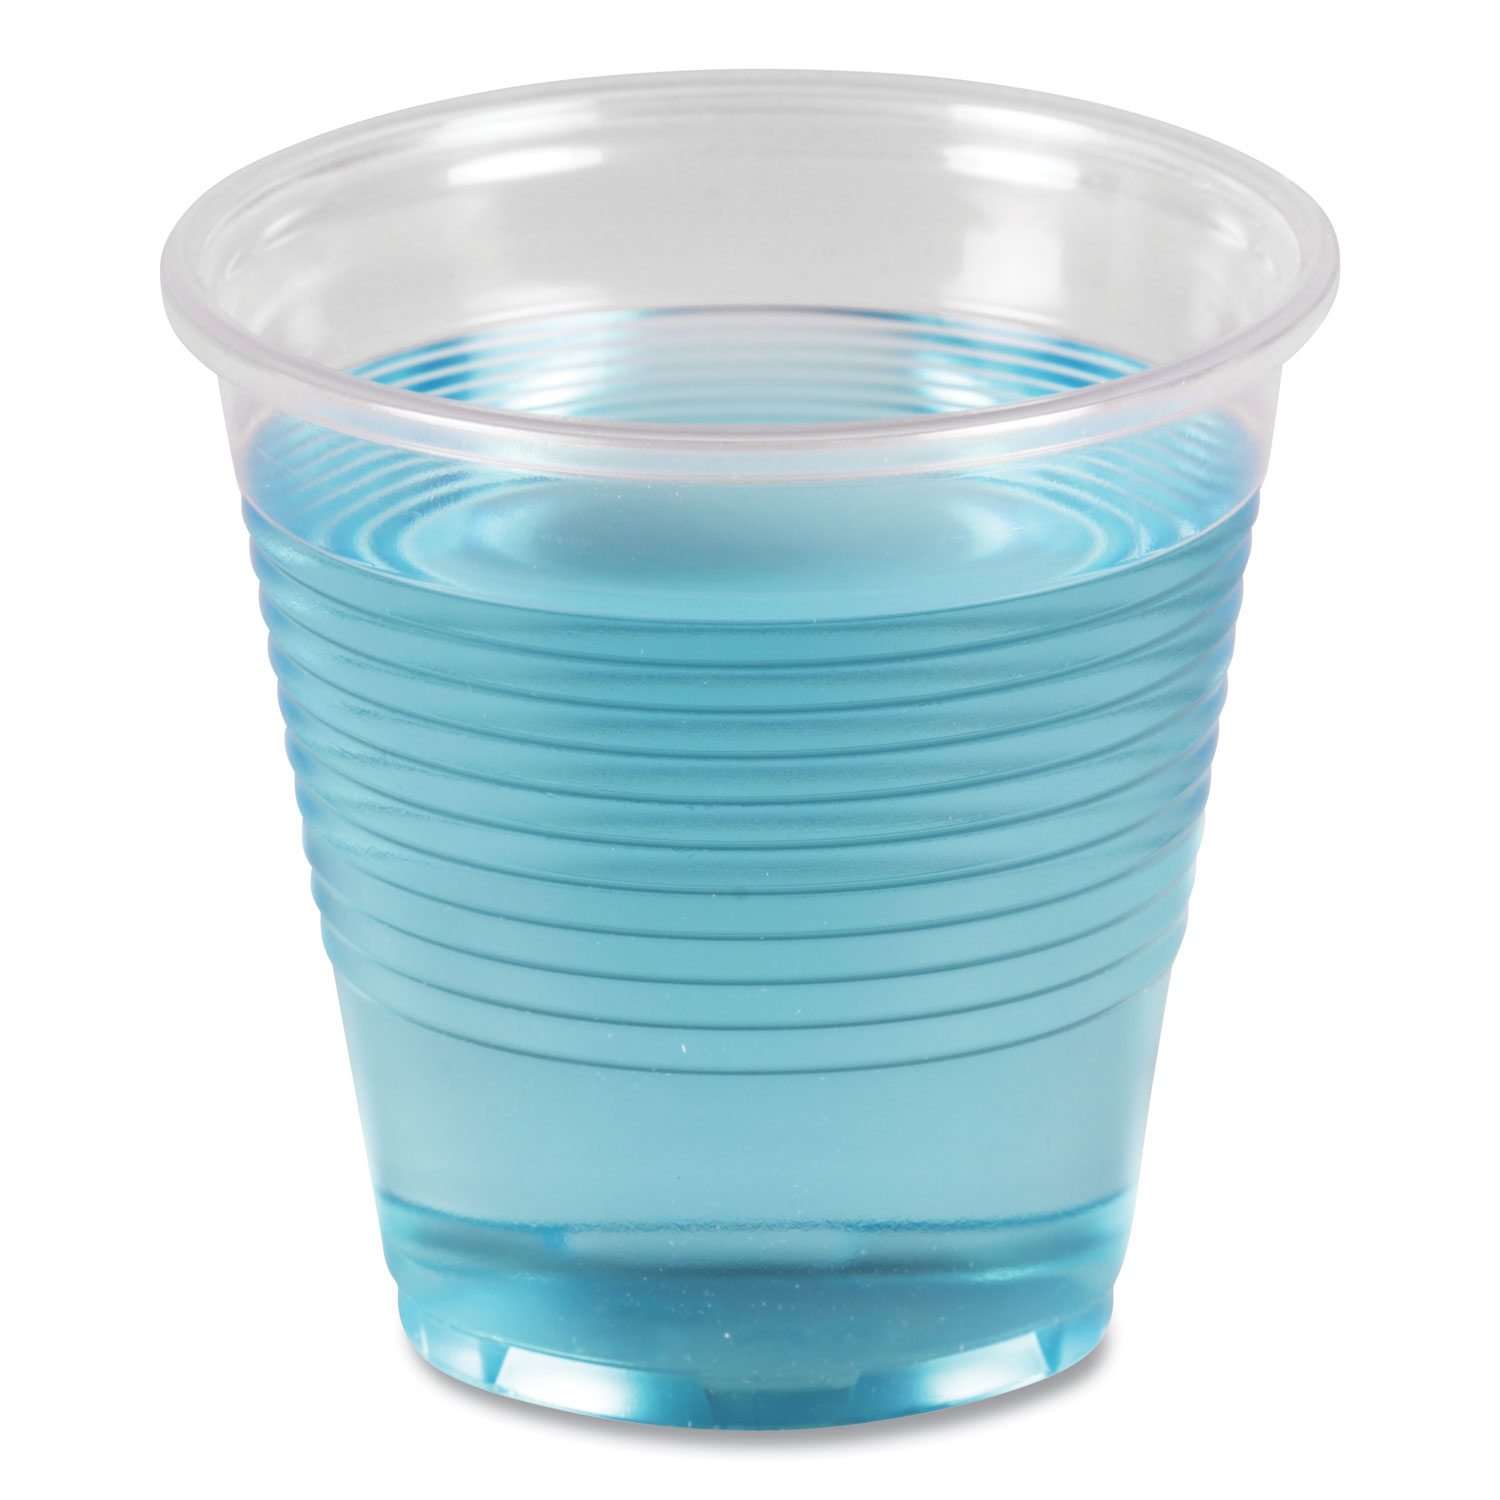 Blue Sky, Clear Plastic Cups, 5 oz, 100 Count (Pack of 1)